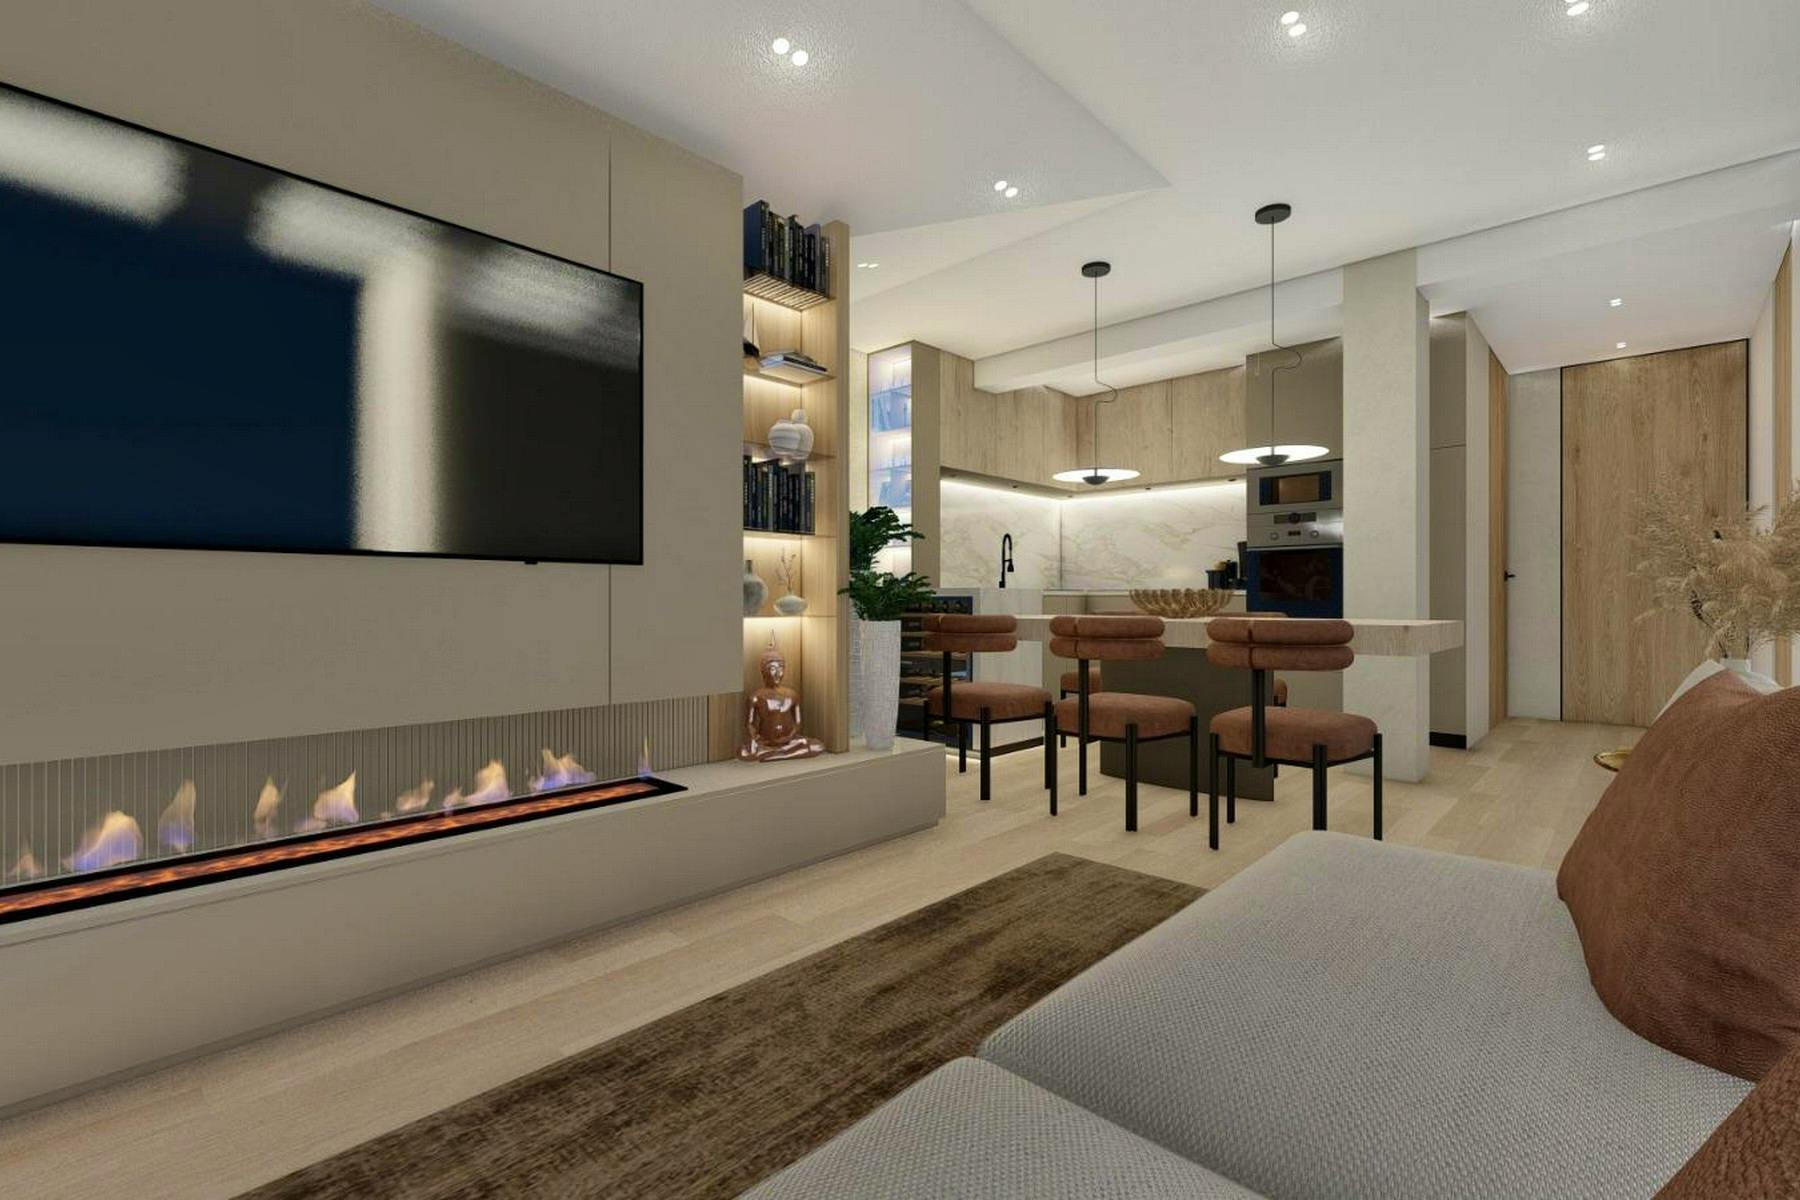 3-D visualization of the living area